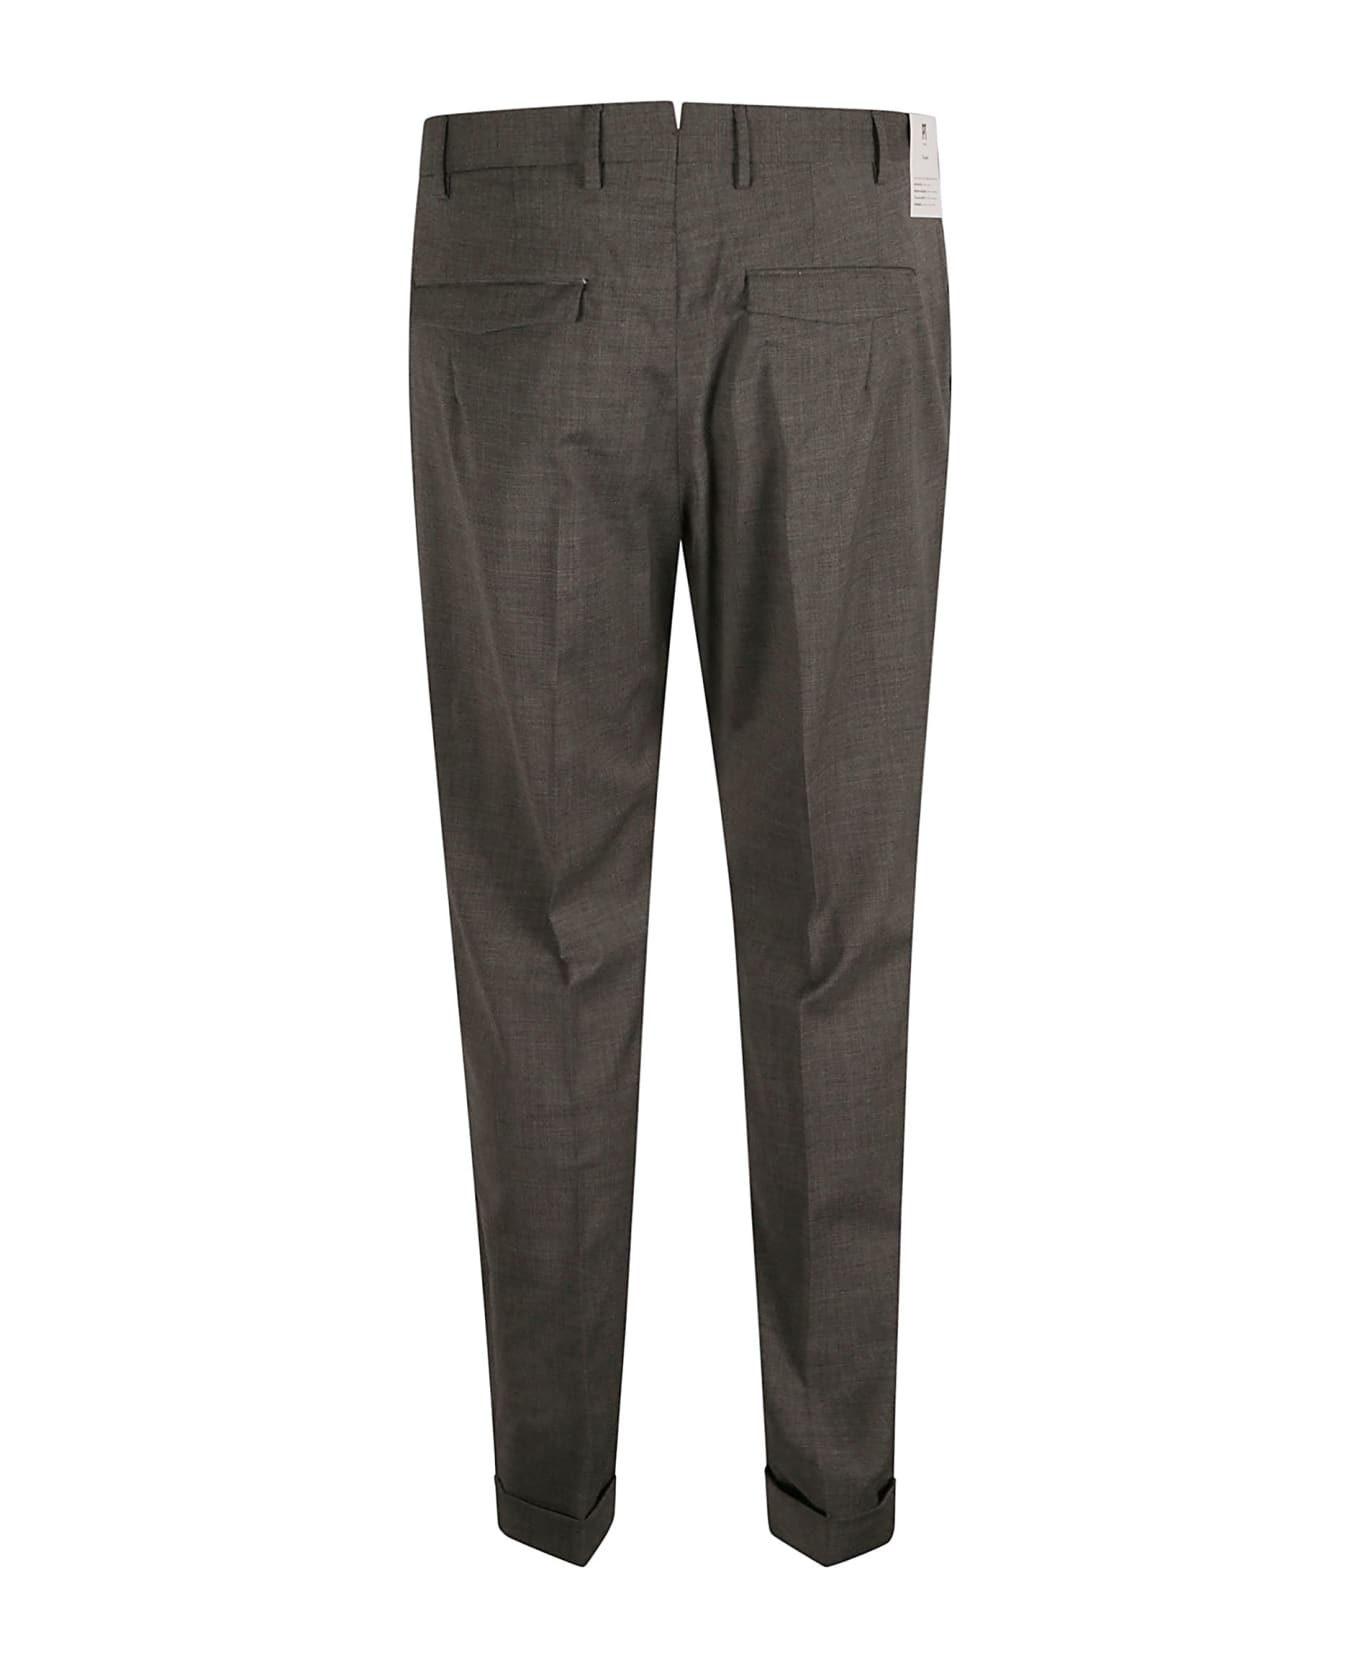 PT Torino Logo Patched Slim Fit Plain Trousers - Grey